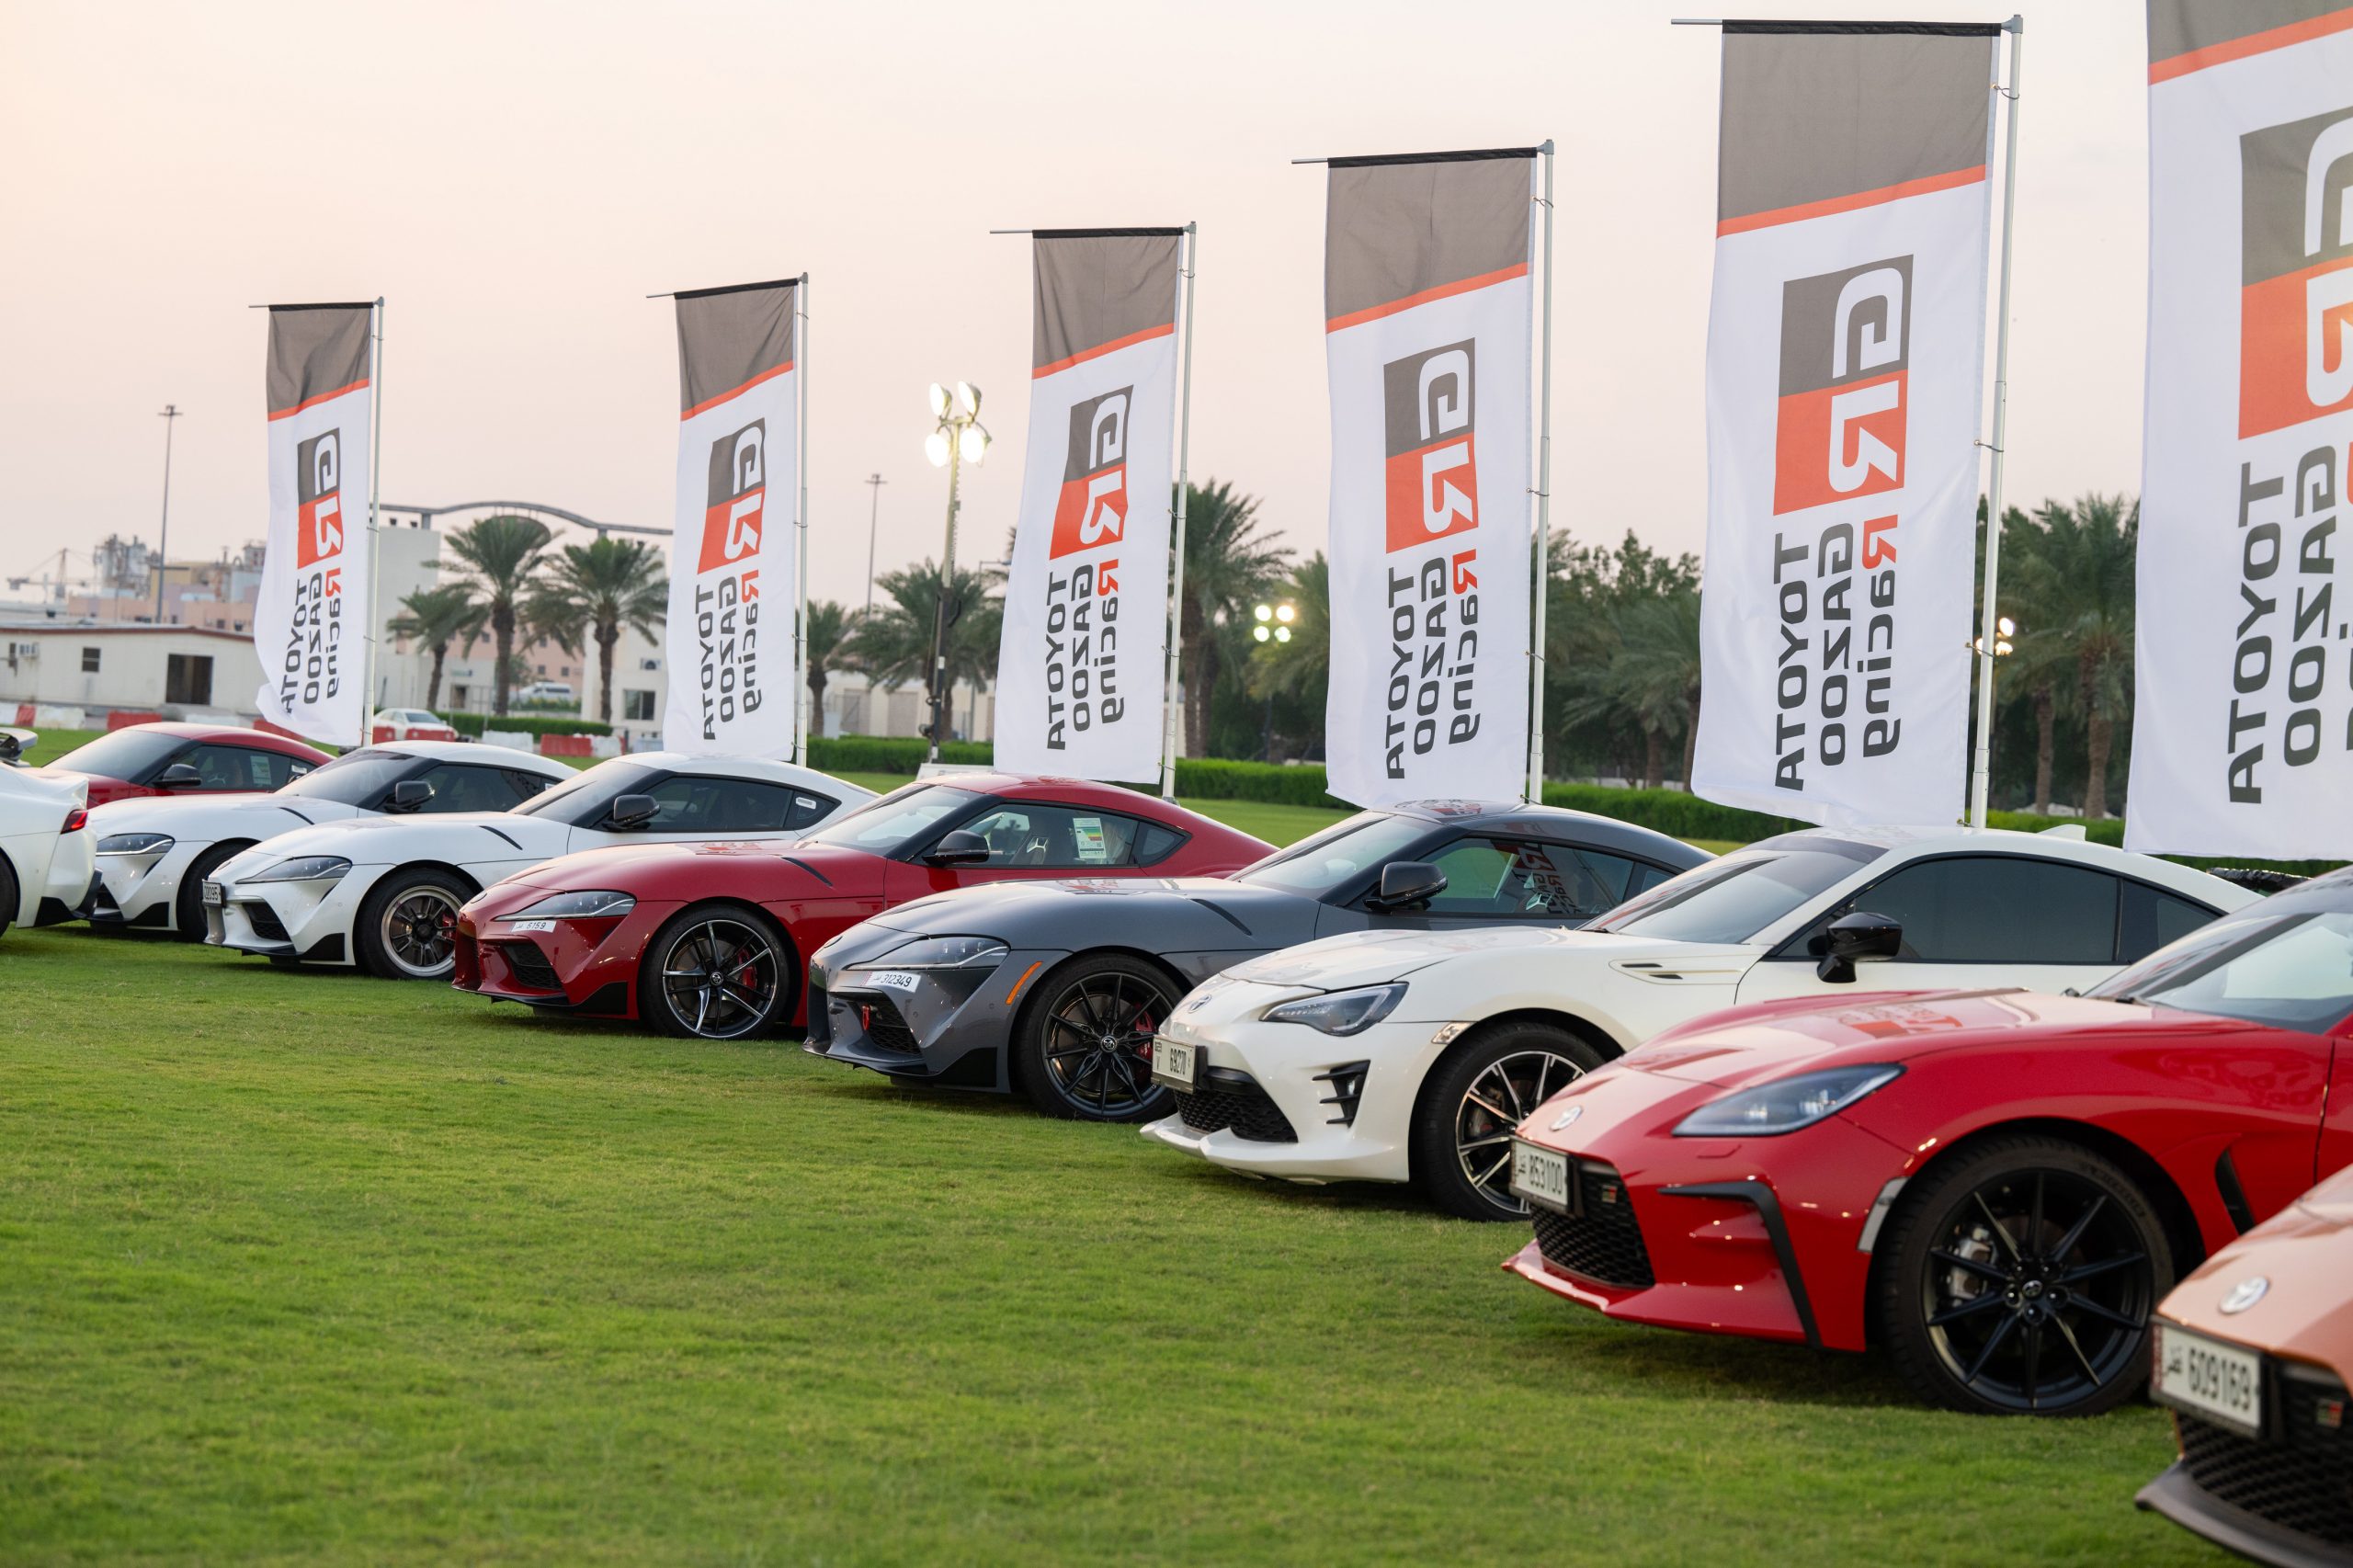 Al Abdulghani Motors organizes an exclusive event for Toyota GR sports car enthusiasts